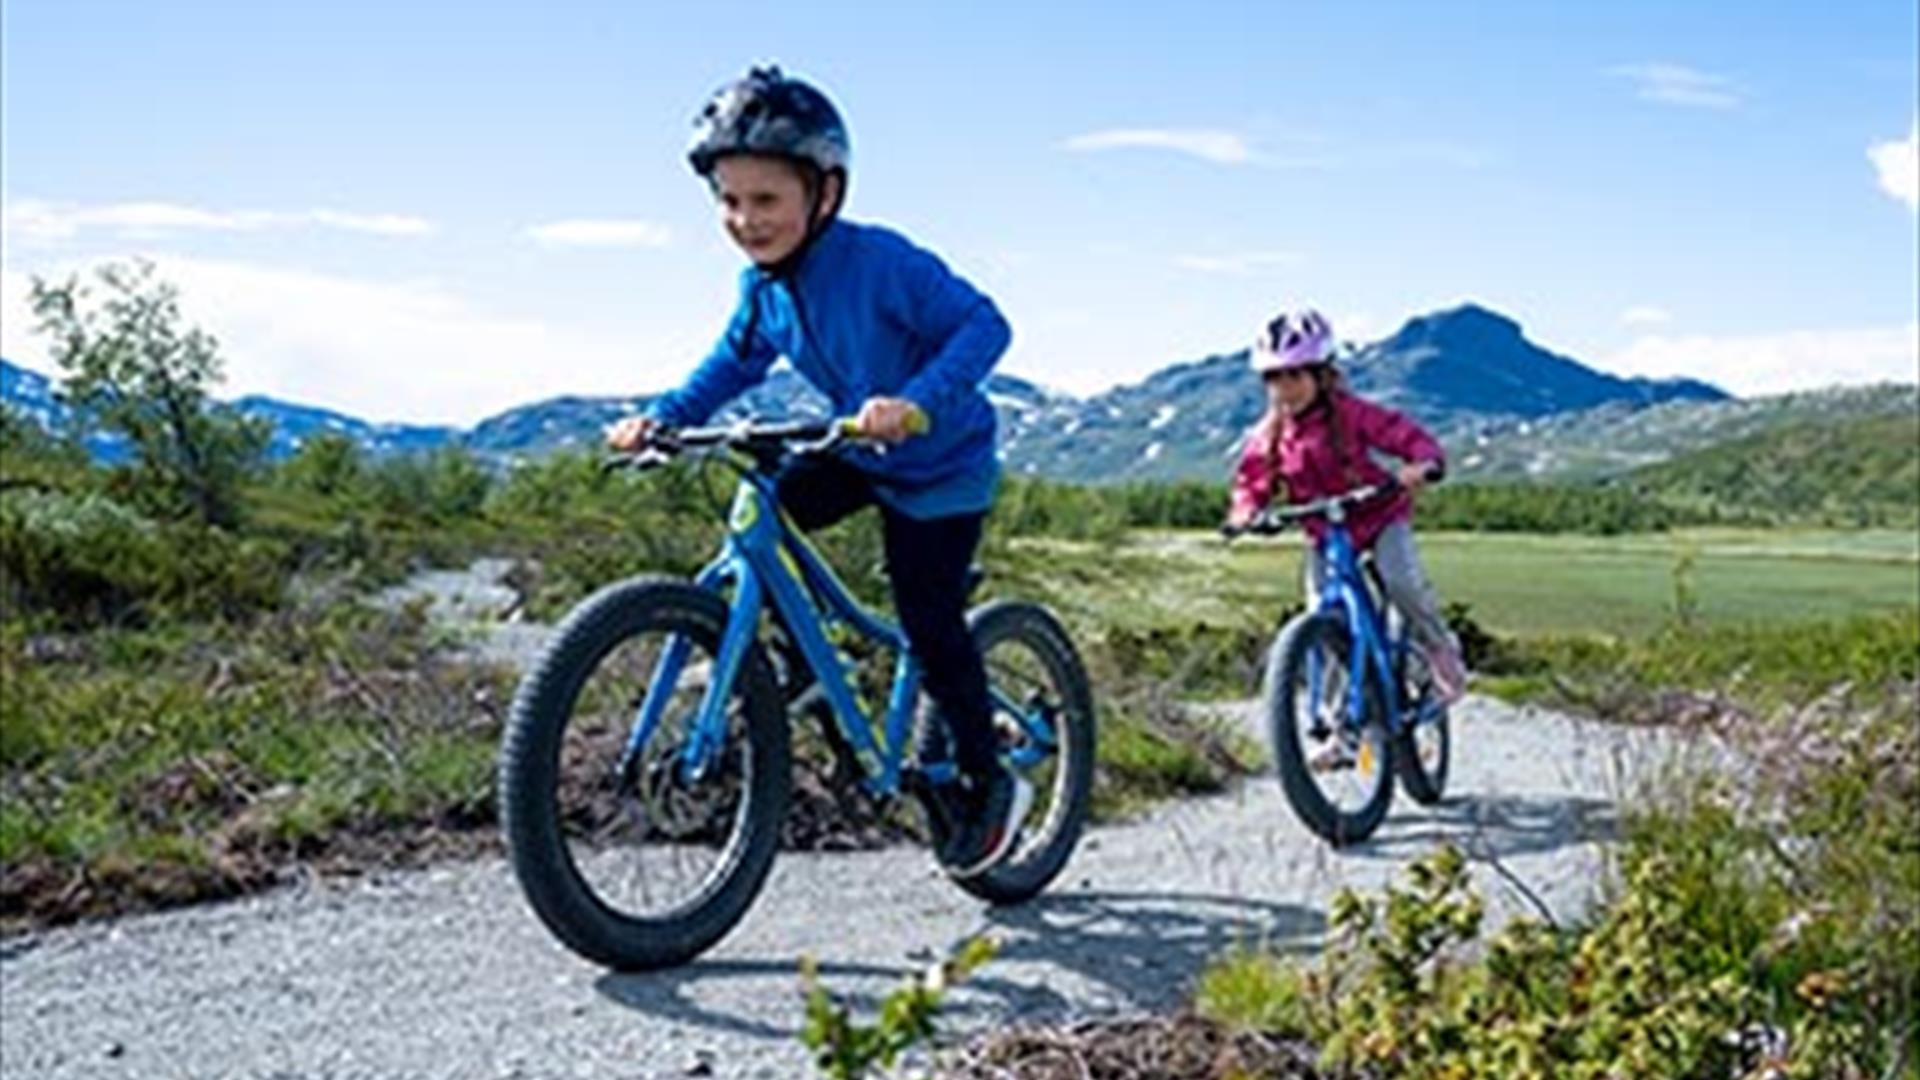 Two children on a mountain biking trail in the mountains.